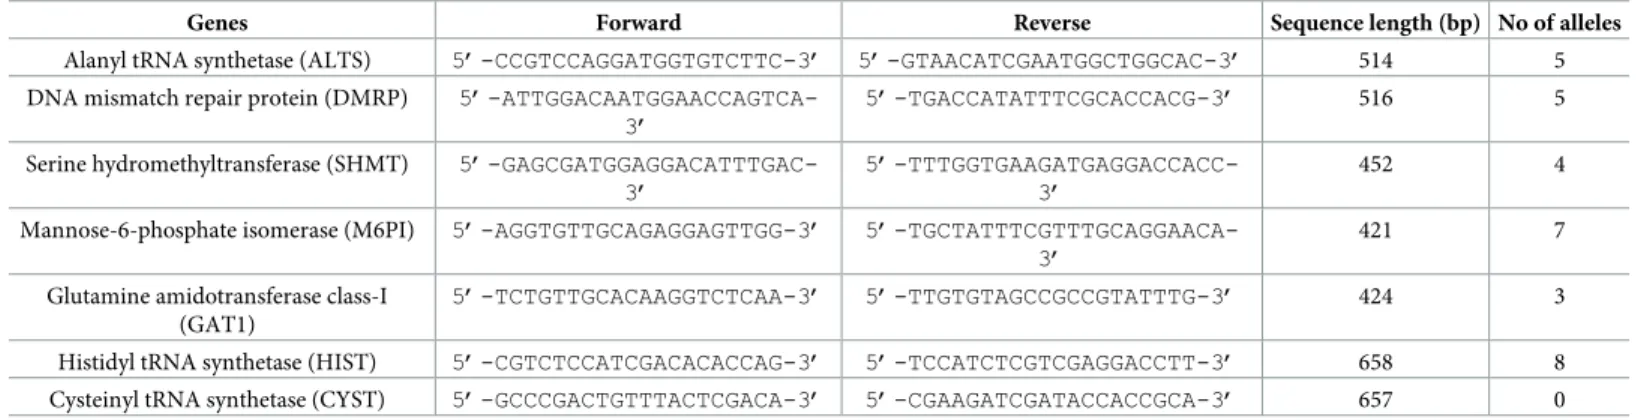 Table 1. Primers used for multilocus sequence typing genes of Trichomonas tenax.